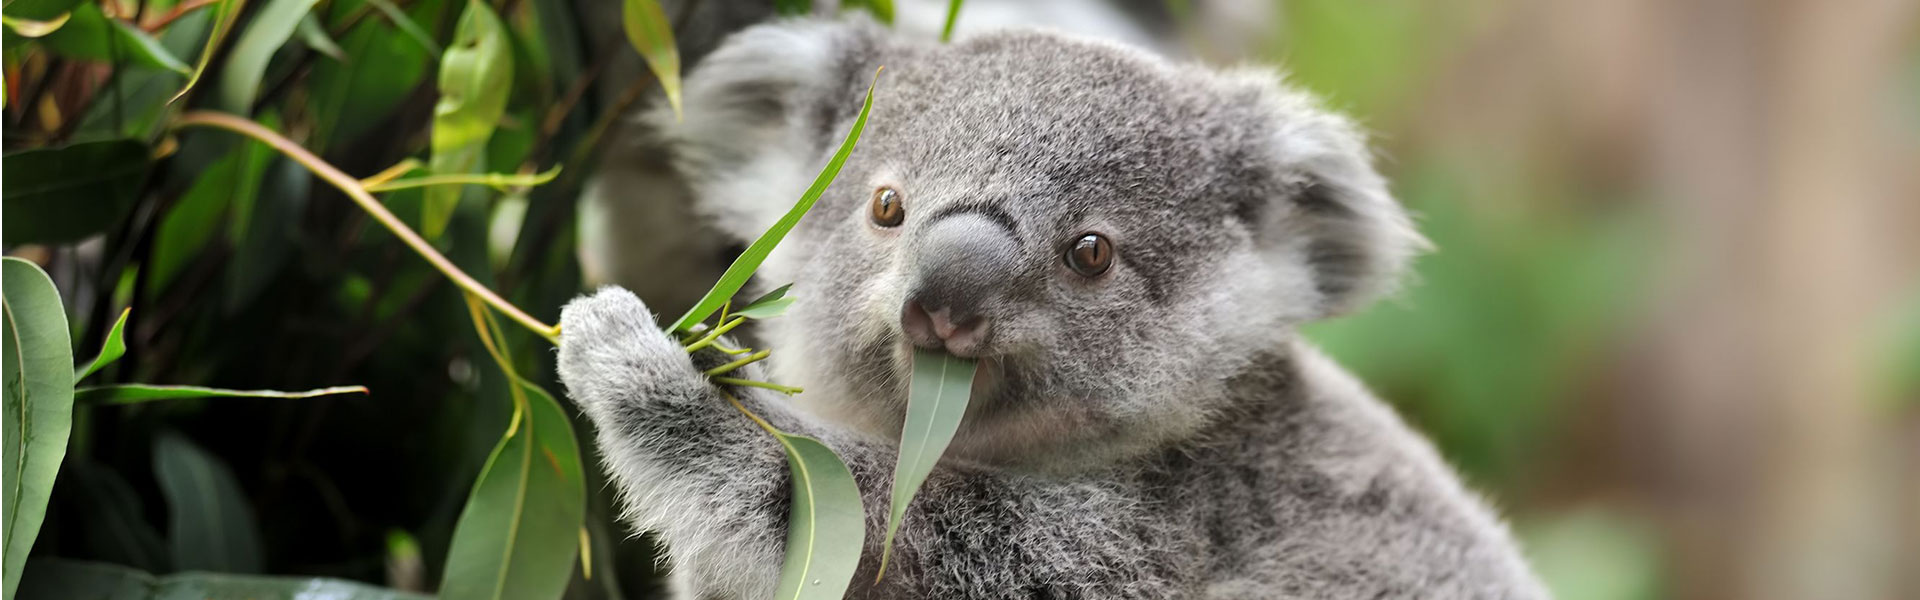 connect with nature koala